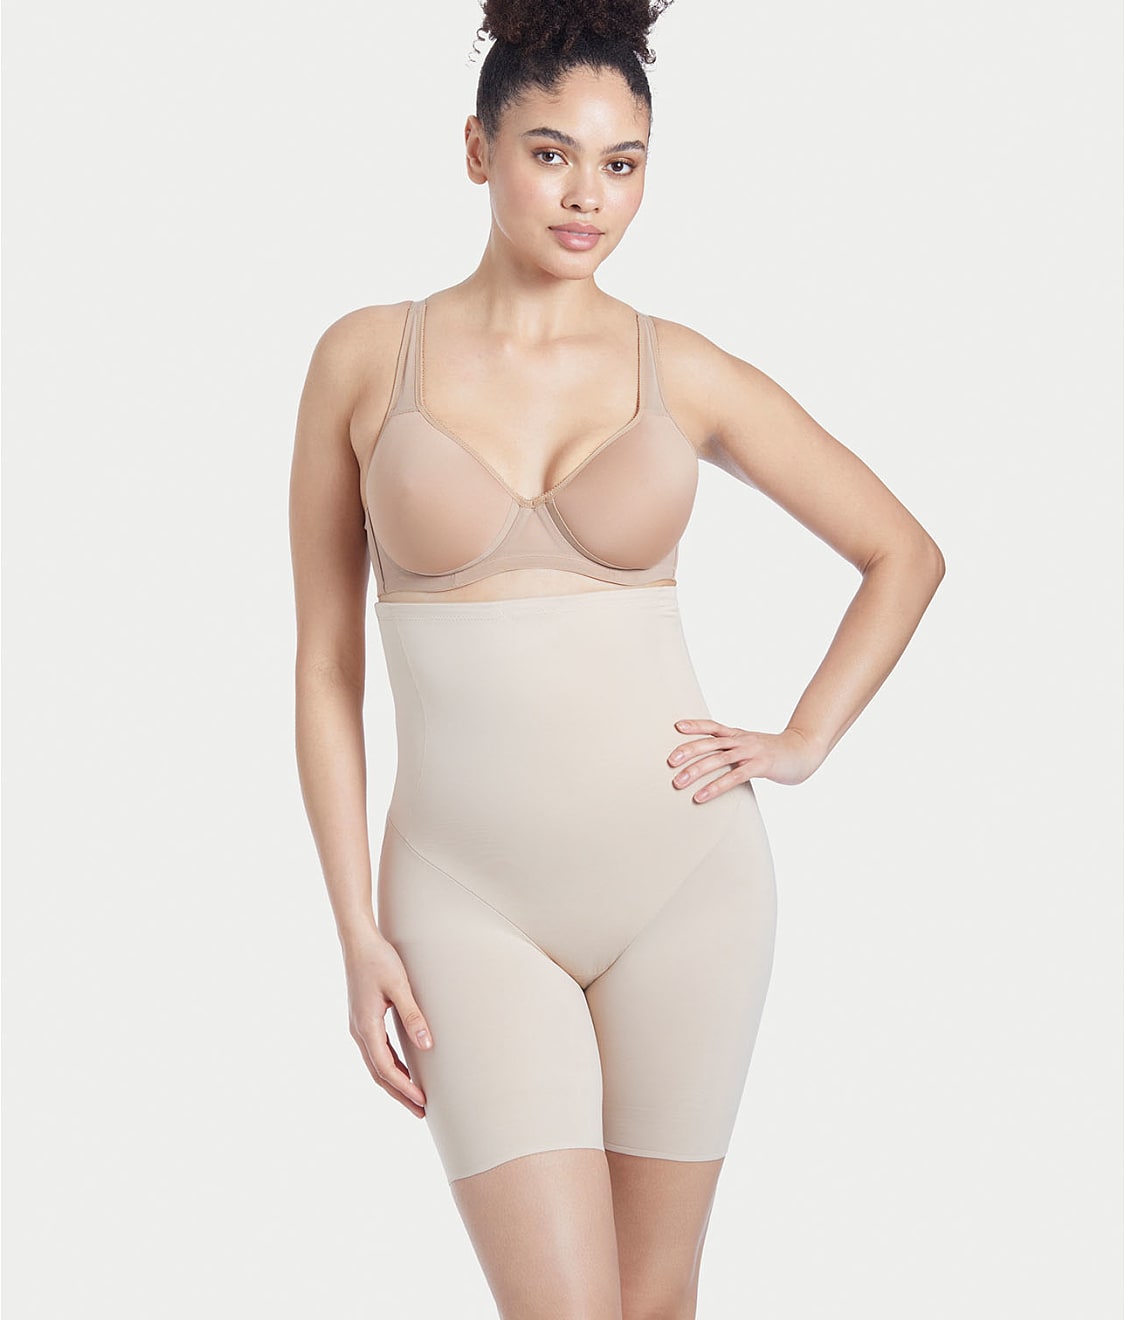 TC Fine Intimates Extra-Firm Control High-Waist Thigh Slimmer